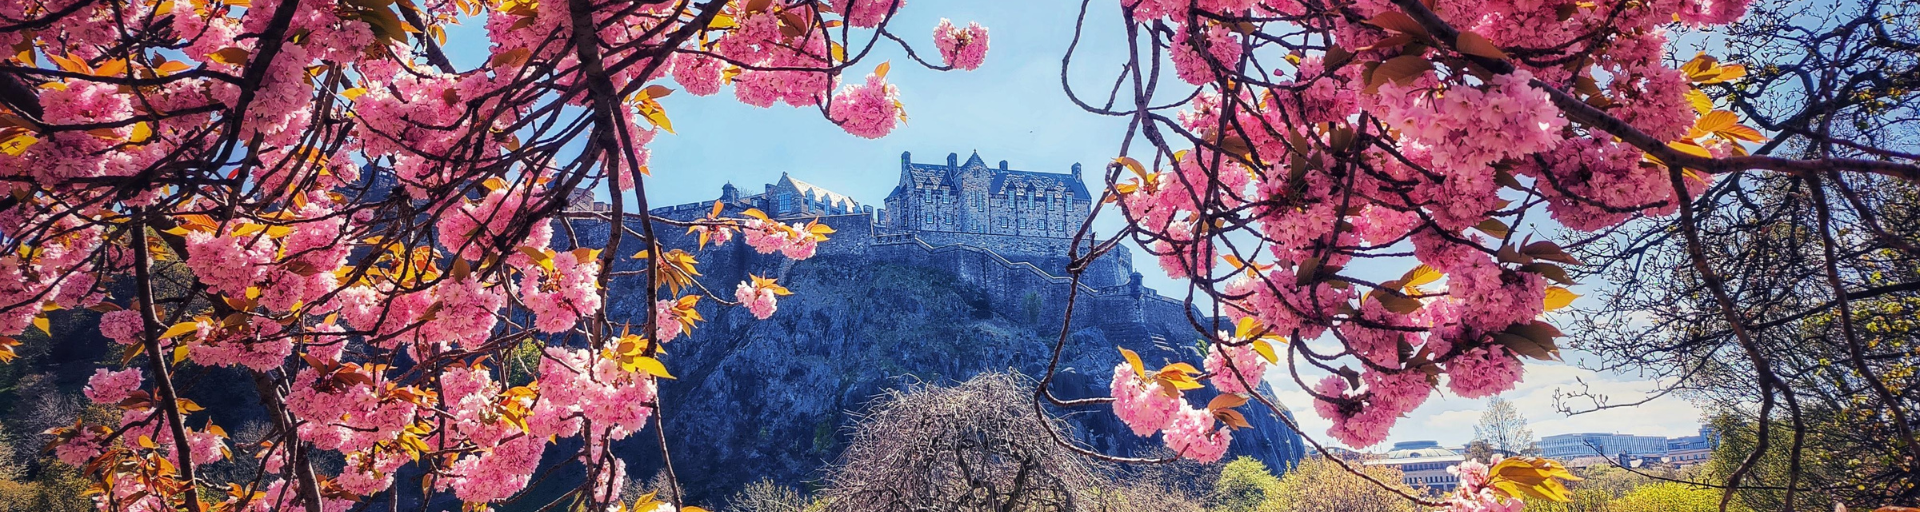 flowers and castle